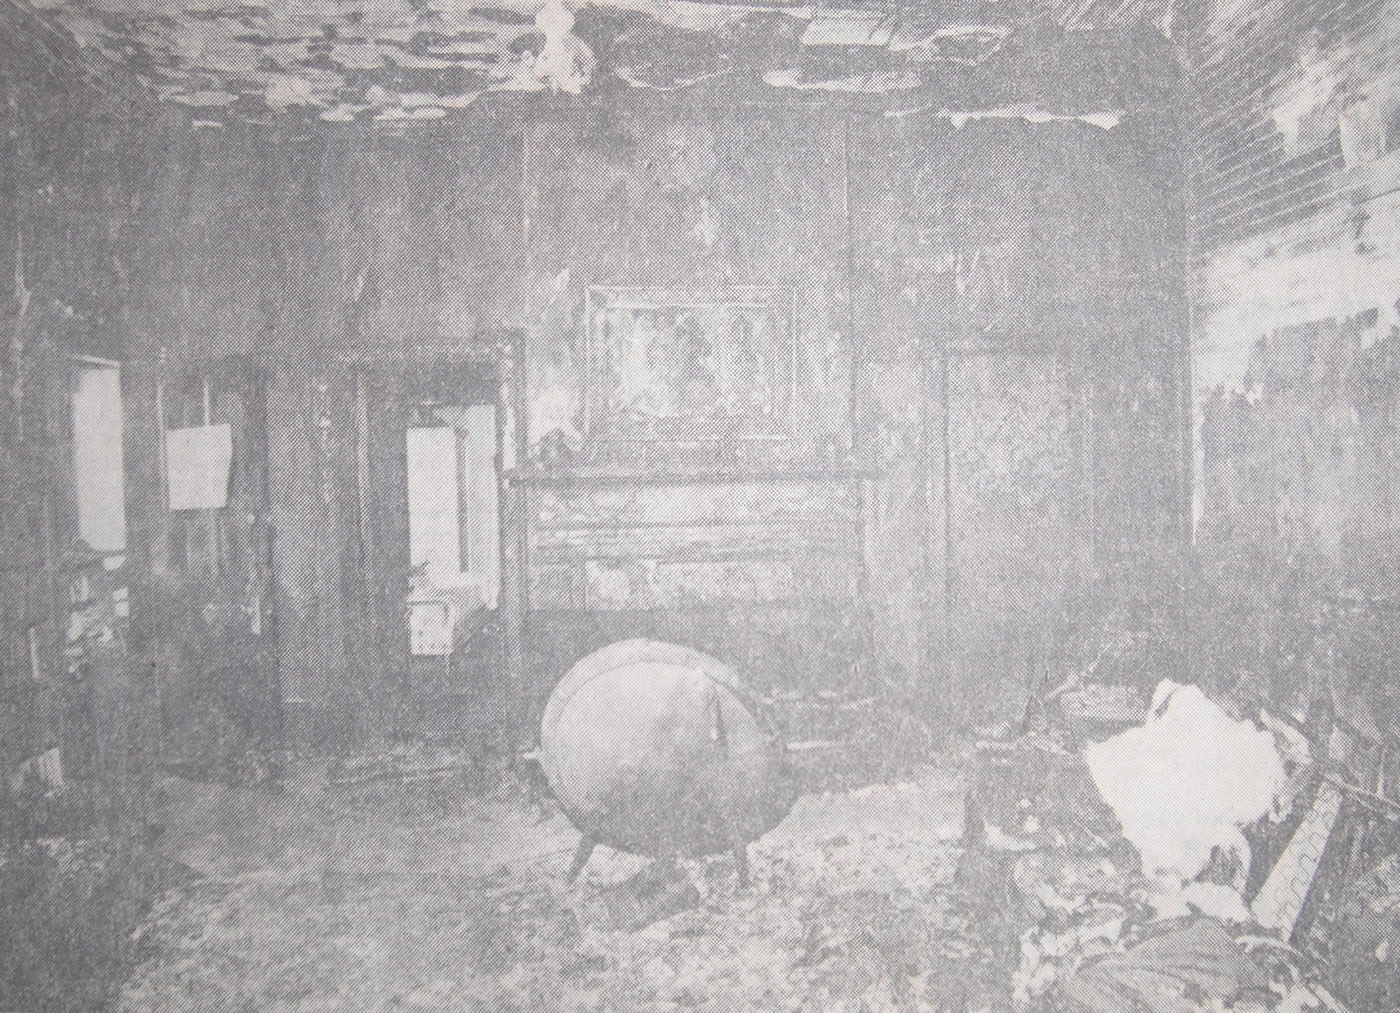 Scorched walls and fire-ravaged furniture are all that remain of a first-floor living room at 15-17 Stanley St. after an early Sunday morning fire in which one man died and five other were injured. A London teenager, who lived at the rooming house, has been charged with arson and murder in connection with the blaze.